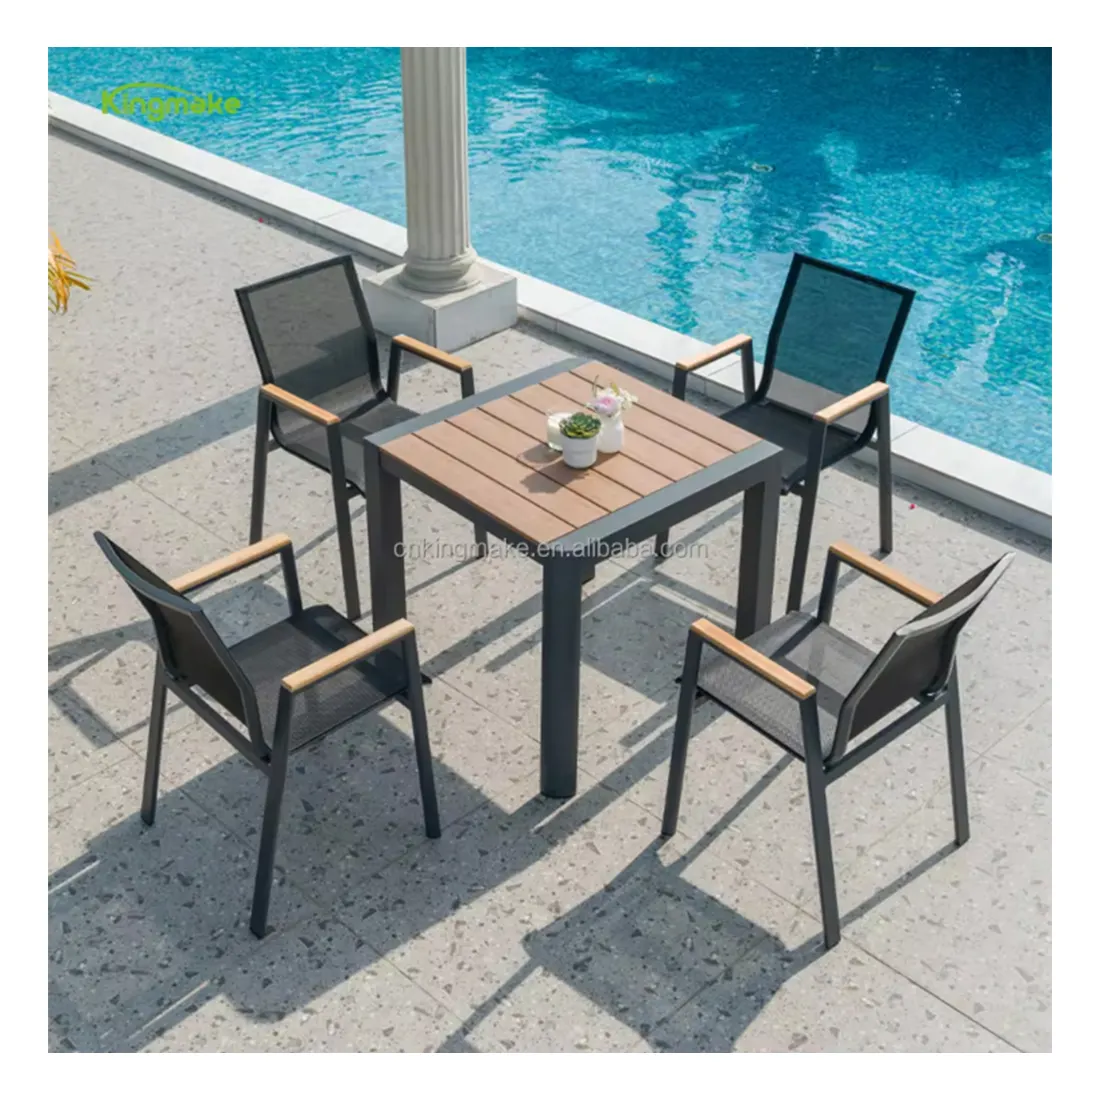 Hot sale 4 seater square bistro table restaurant used plastic wood top dining table and chairs outdoor furniture set for balcony